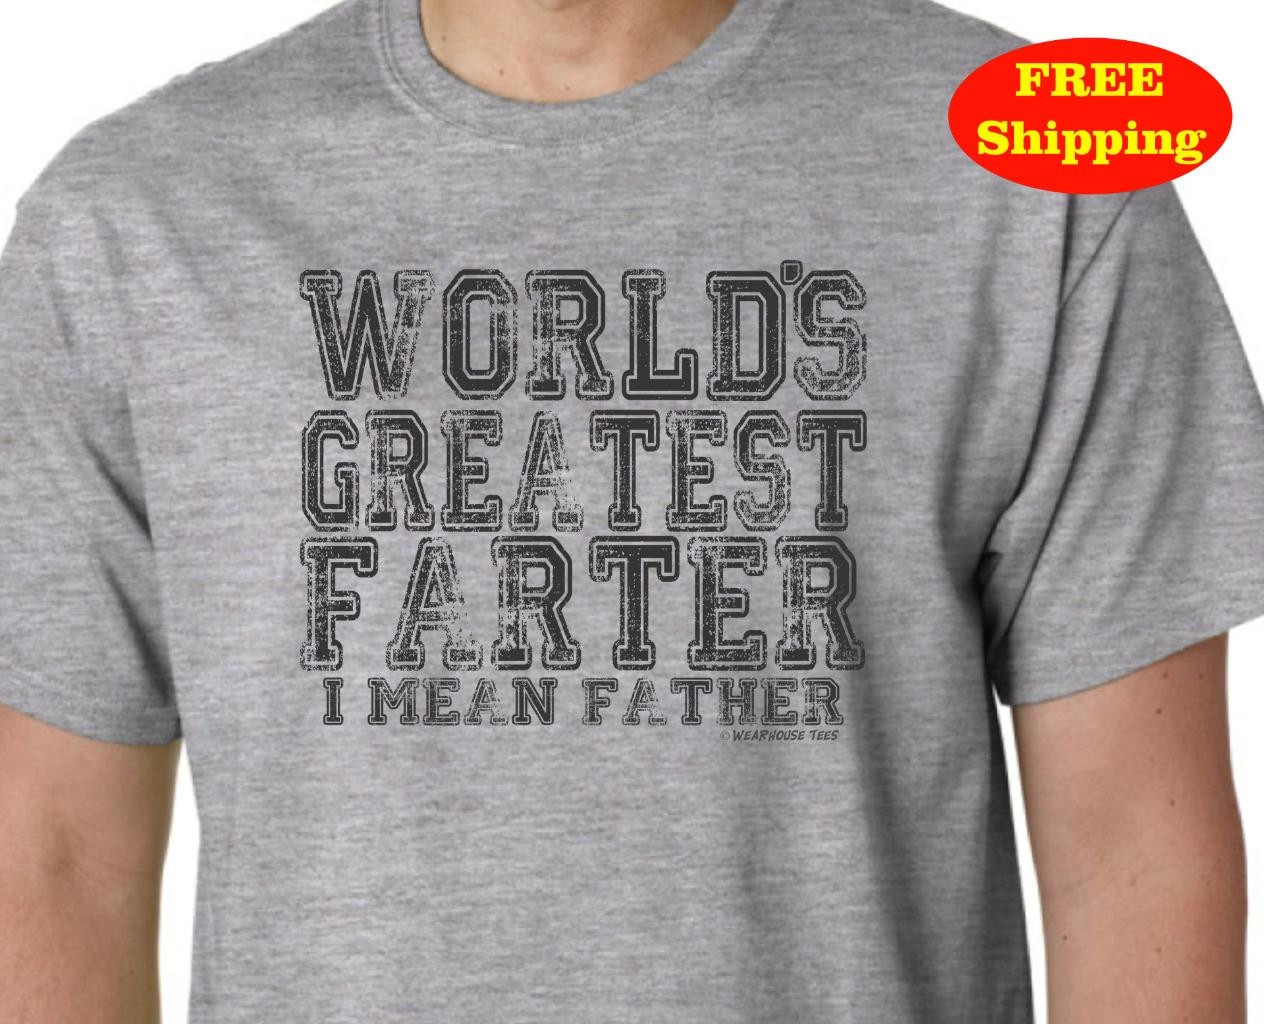 Funny Fathers Day Gifts
 Funny World s Greatest FARTER Father T Shirt Birthday